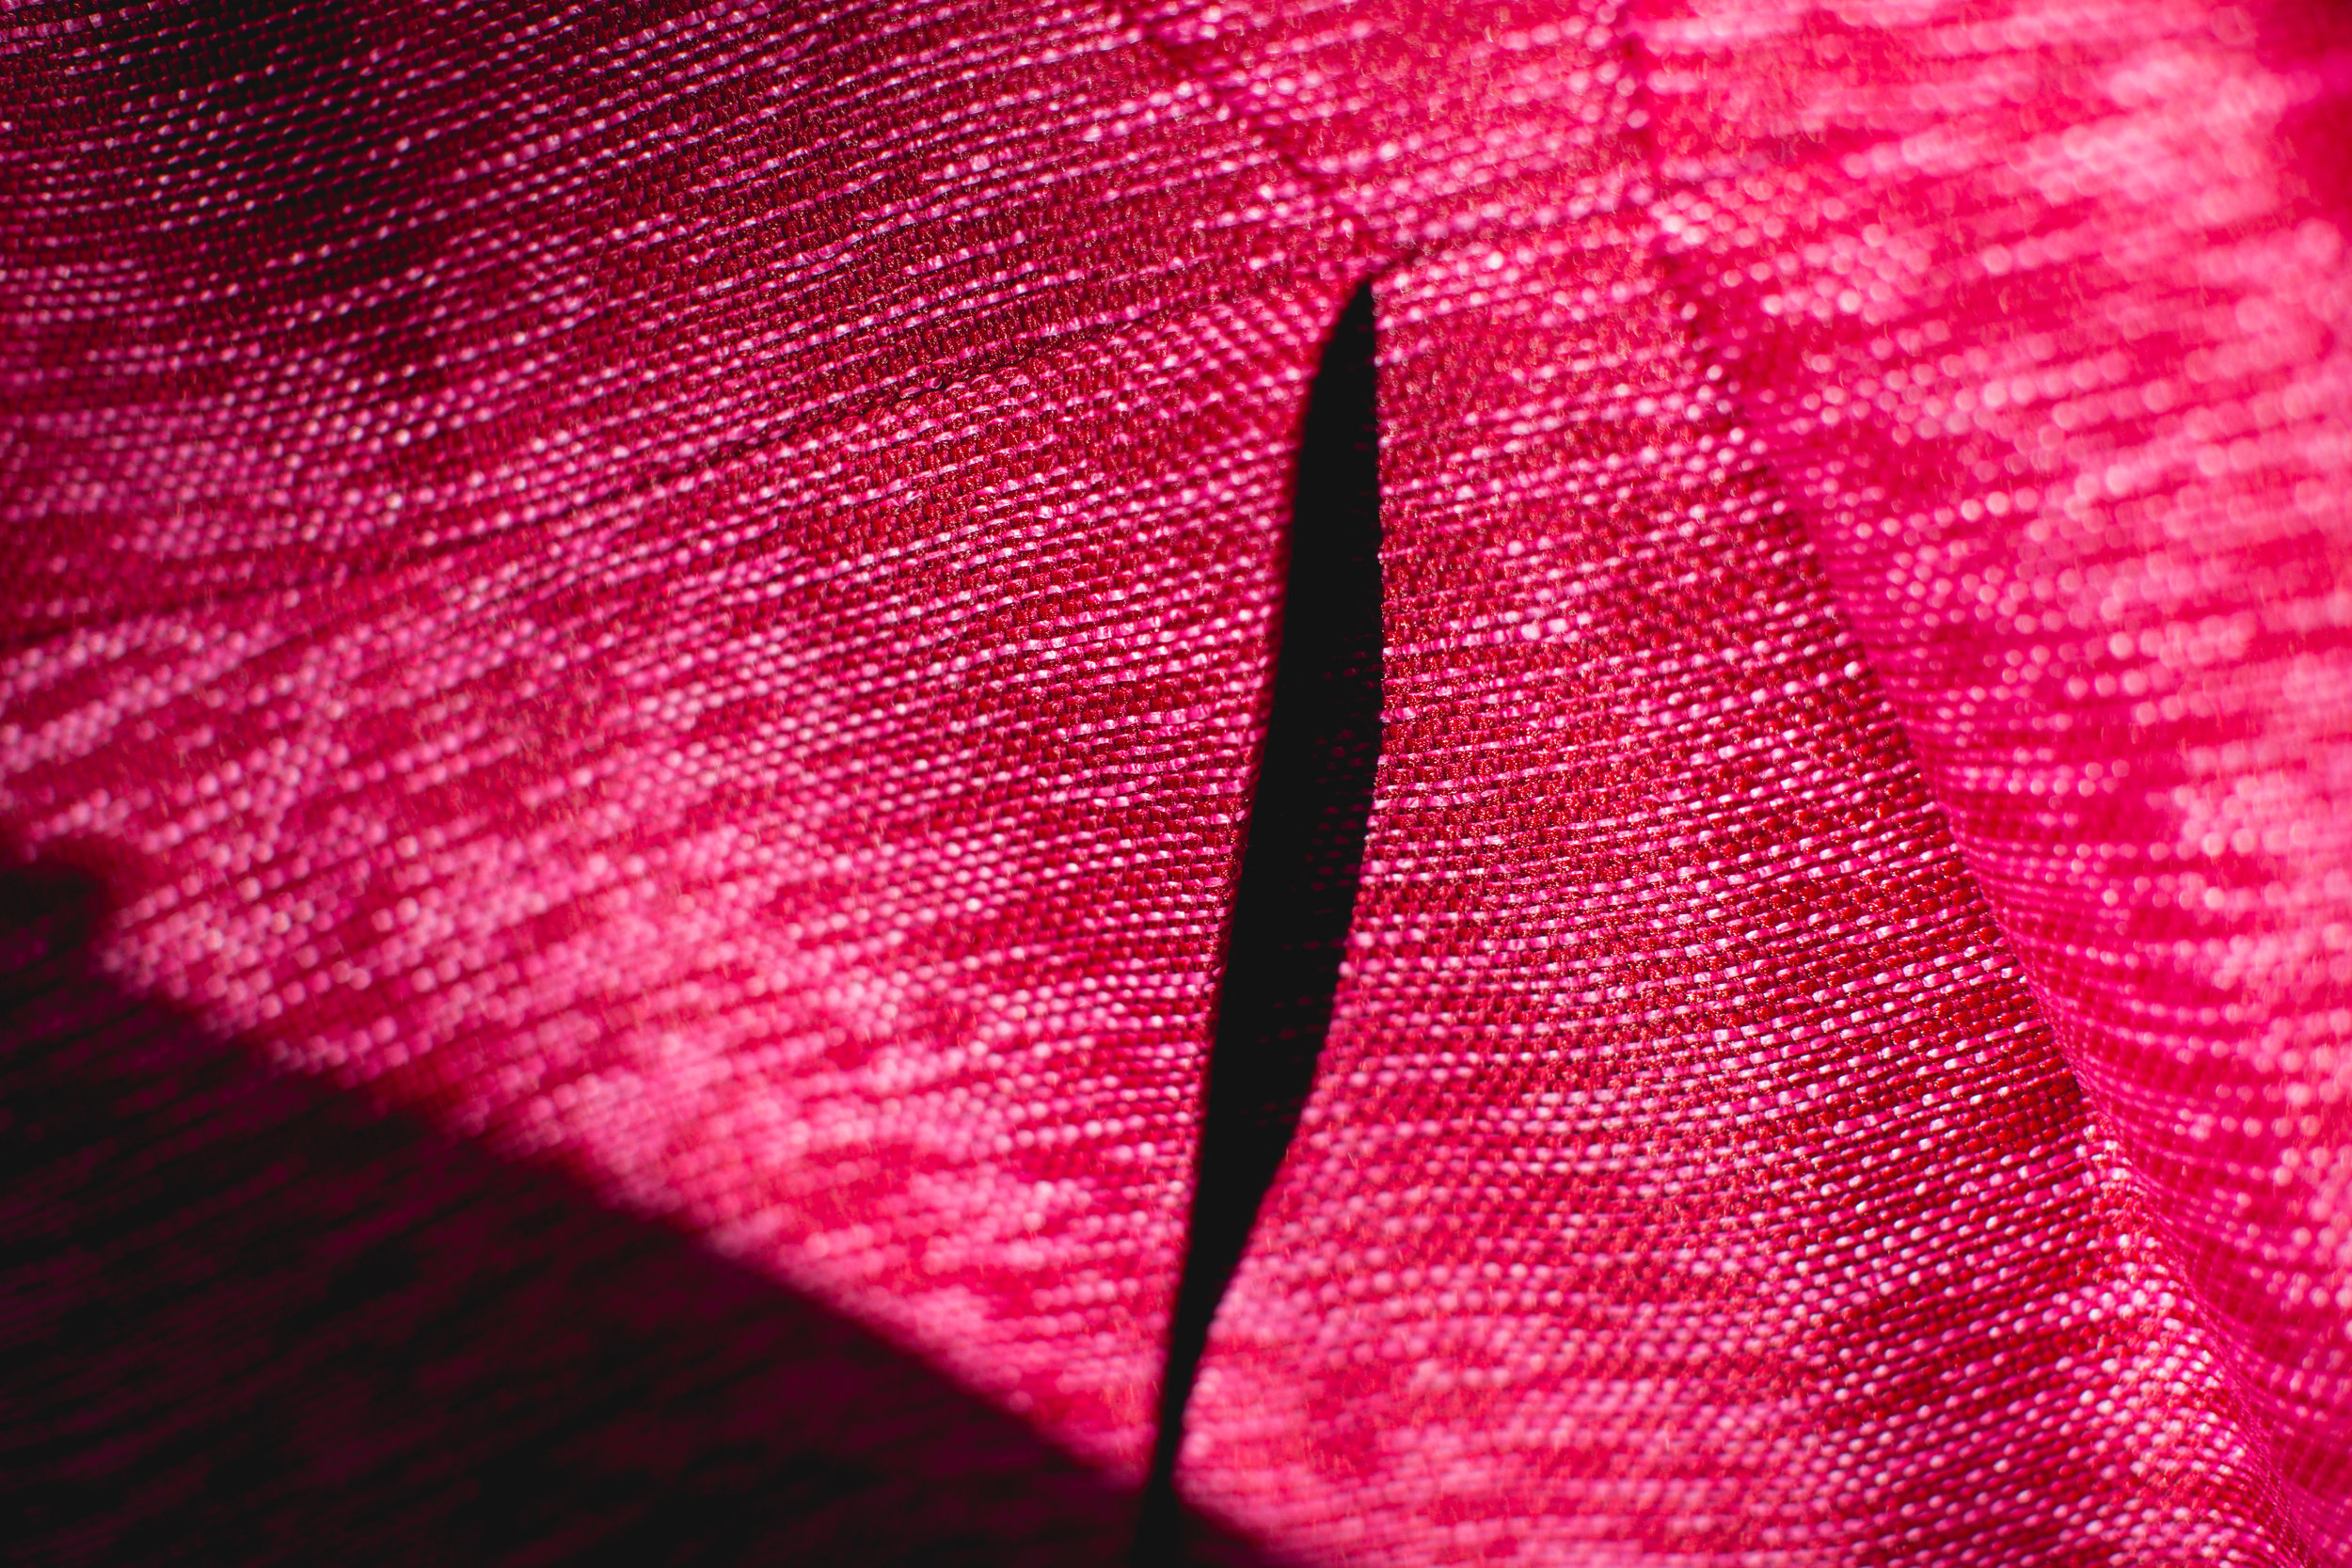 Lifestyle-detail-of-a-pink-dress-in-light-and-shadow-london-stylist